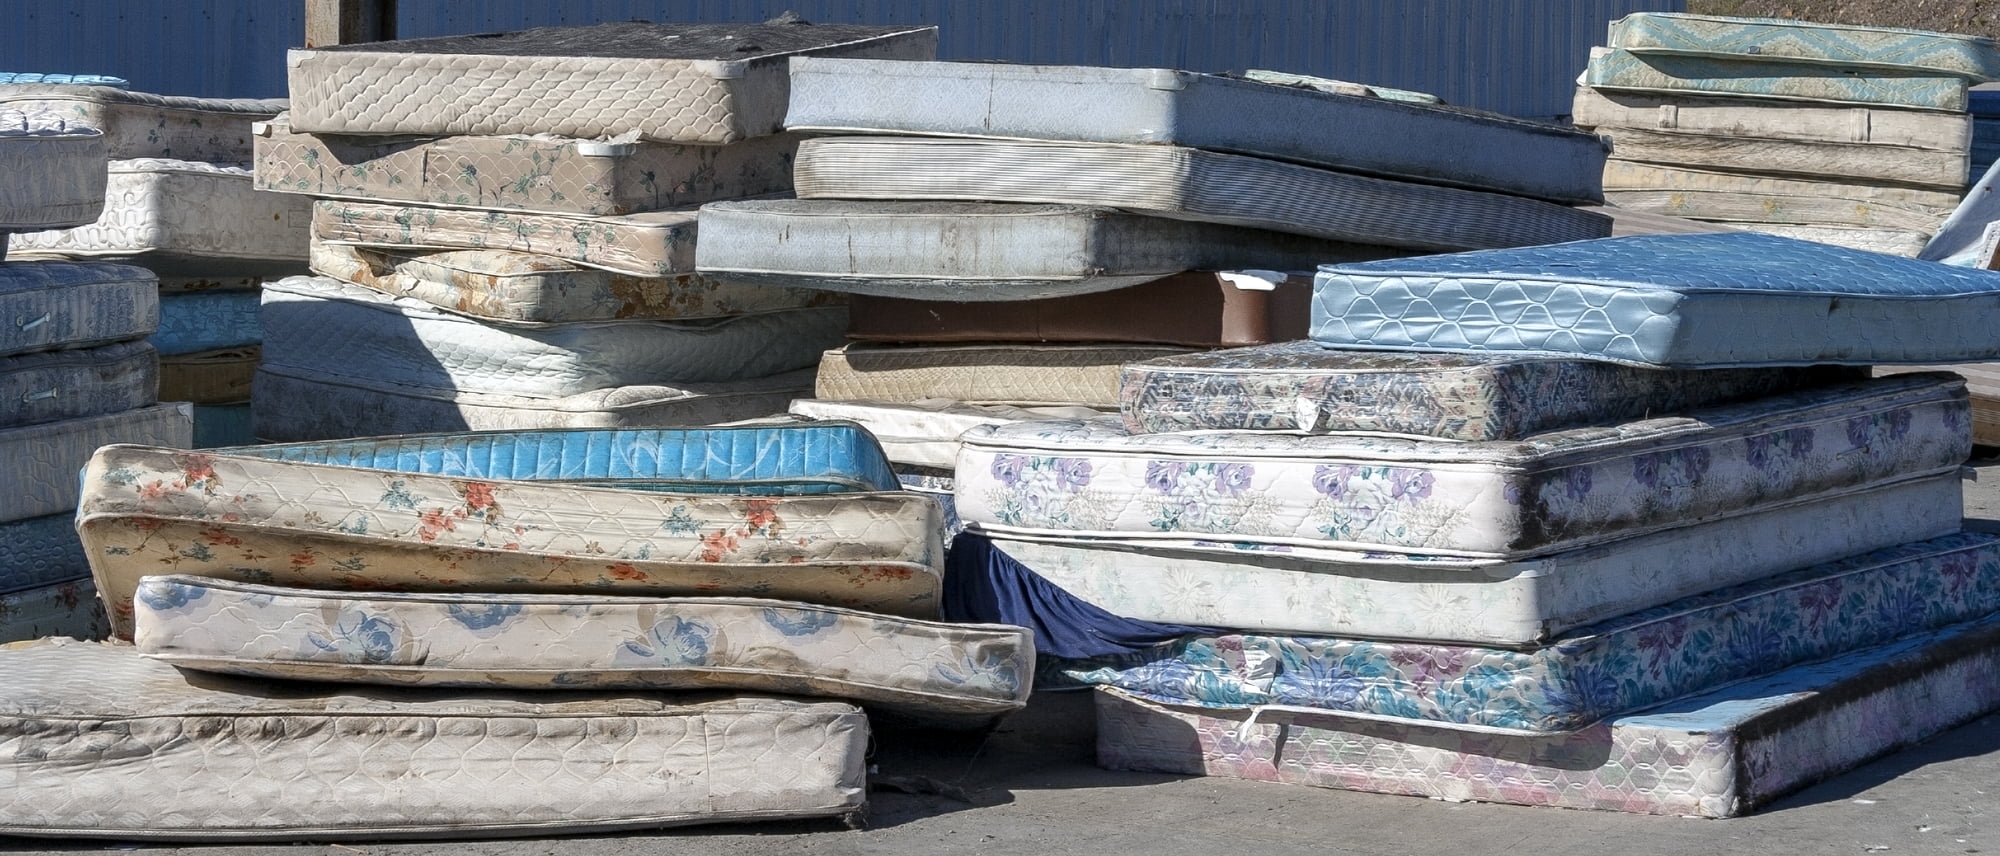 a pile of old mattresses at a recycling depot